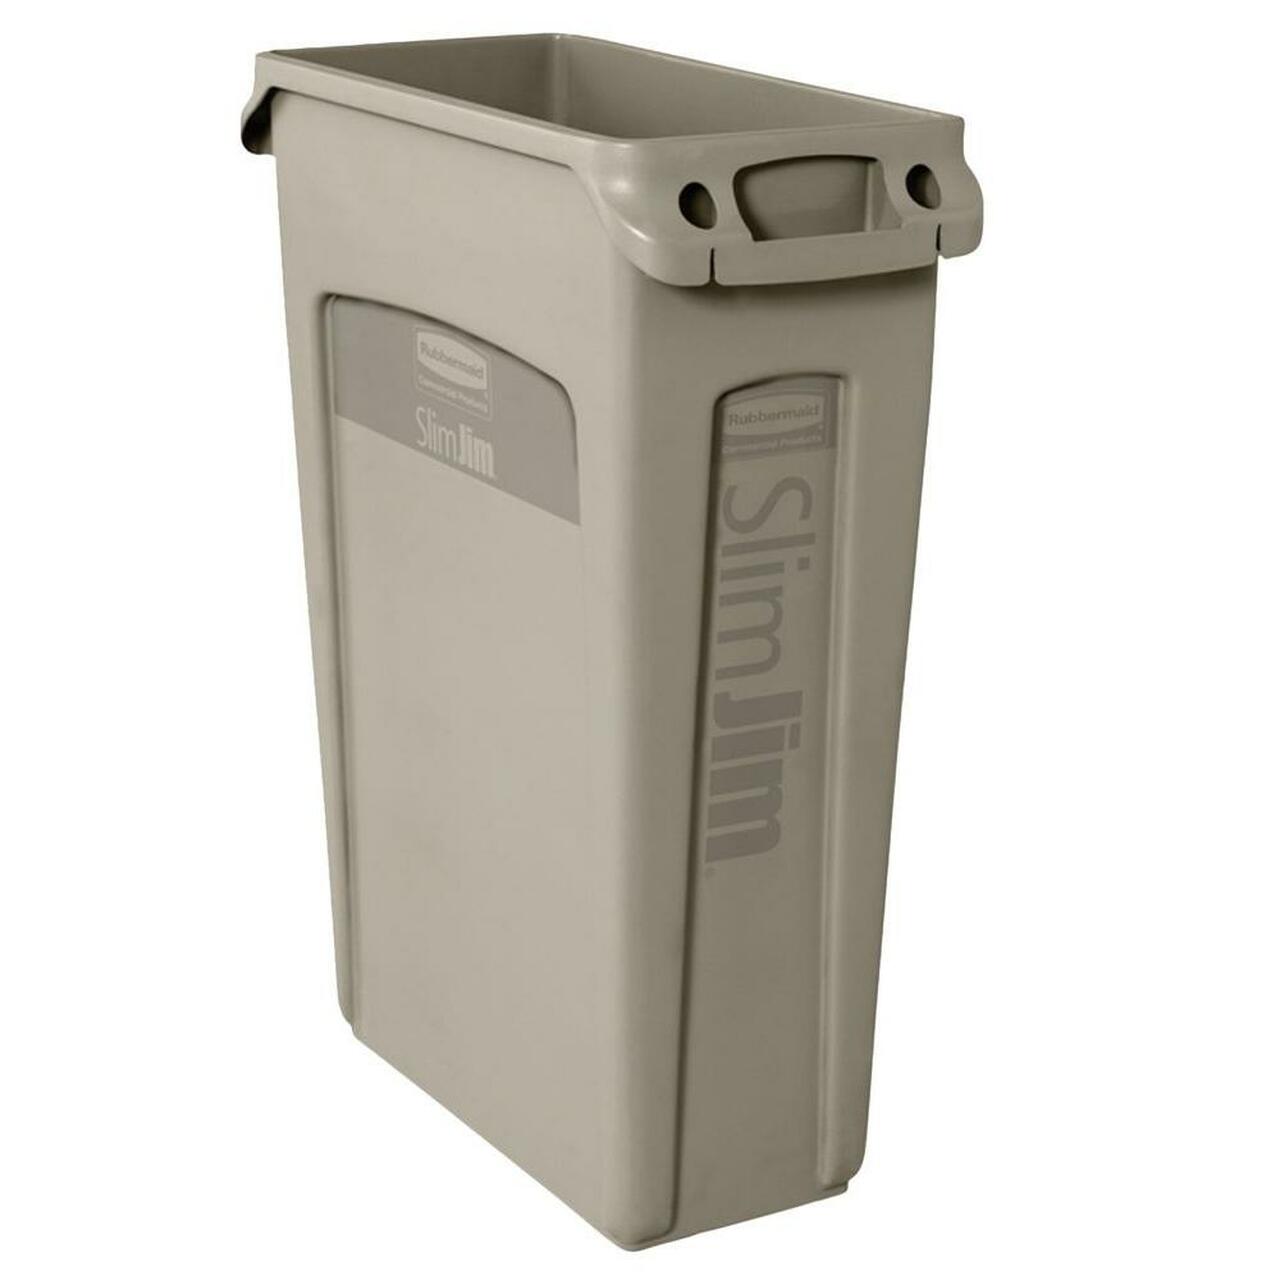 Rubbermaid Slim Jim Waste Container with Venting Channels - 87L